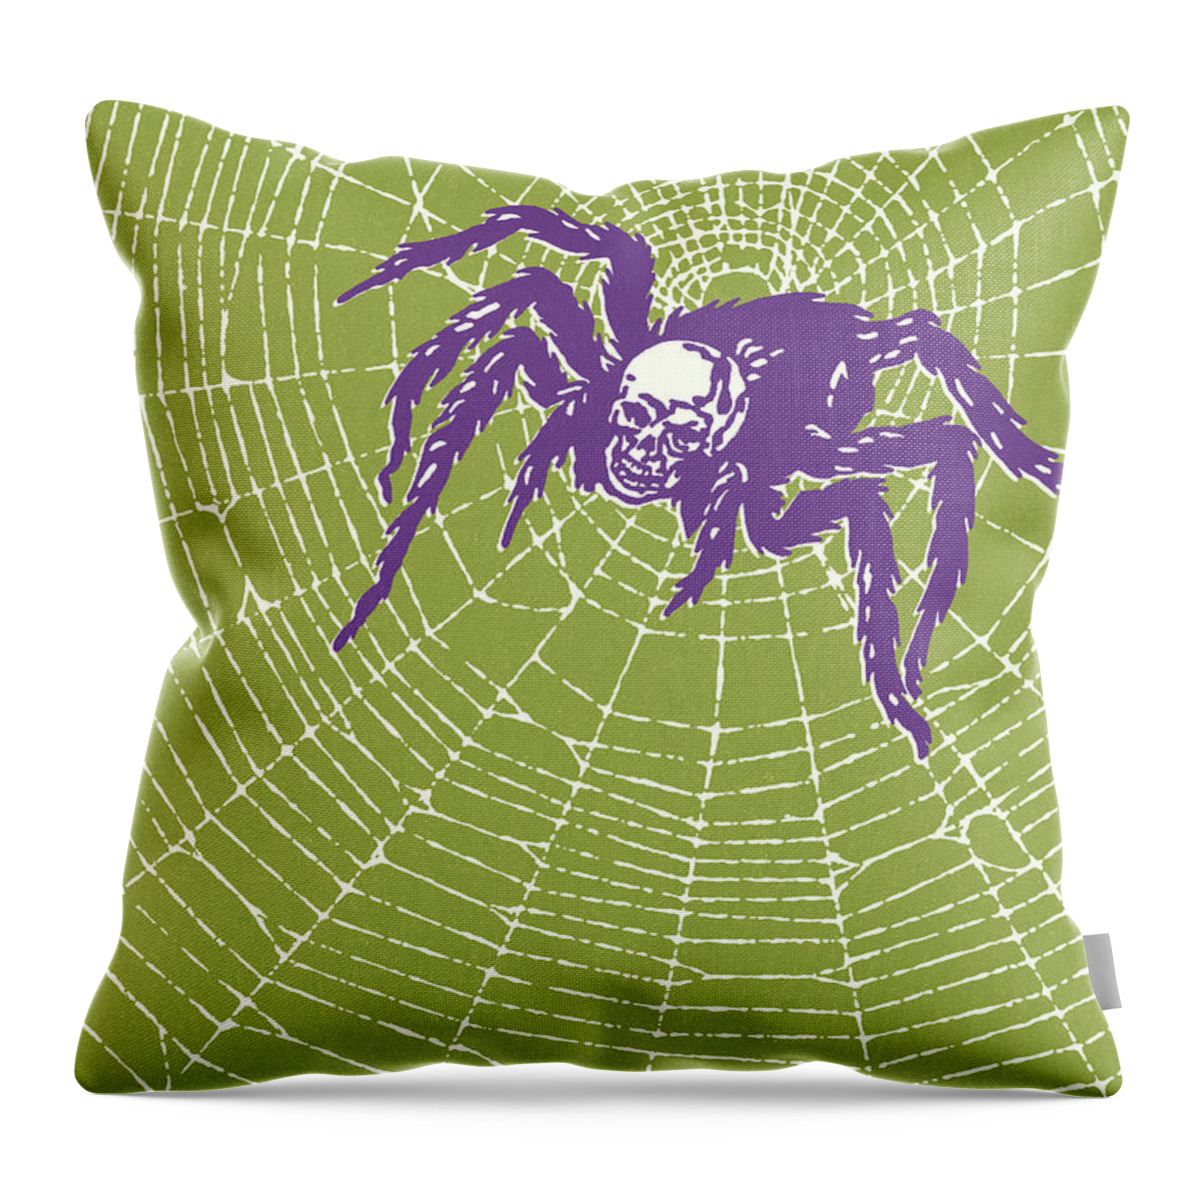 Campy Throw Pillow featuring the drawing Large Spider on a Spider Web by CSA Images